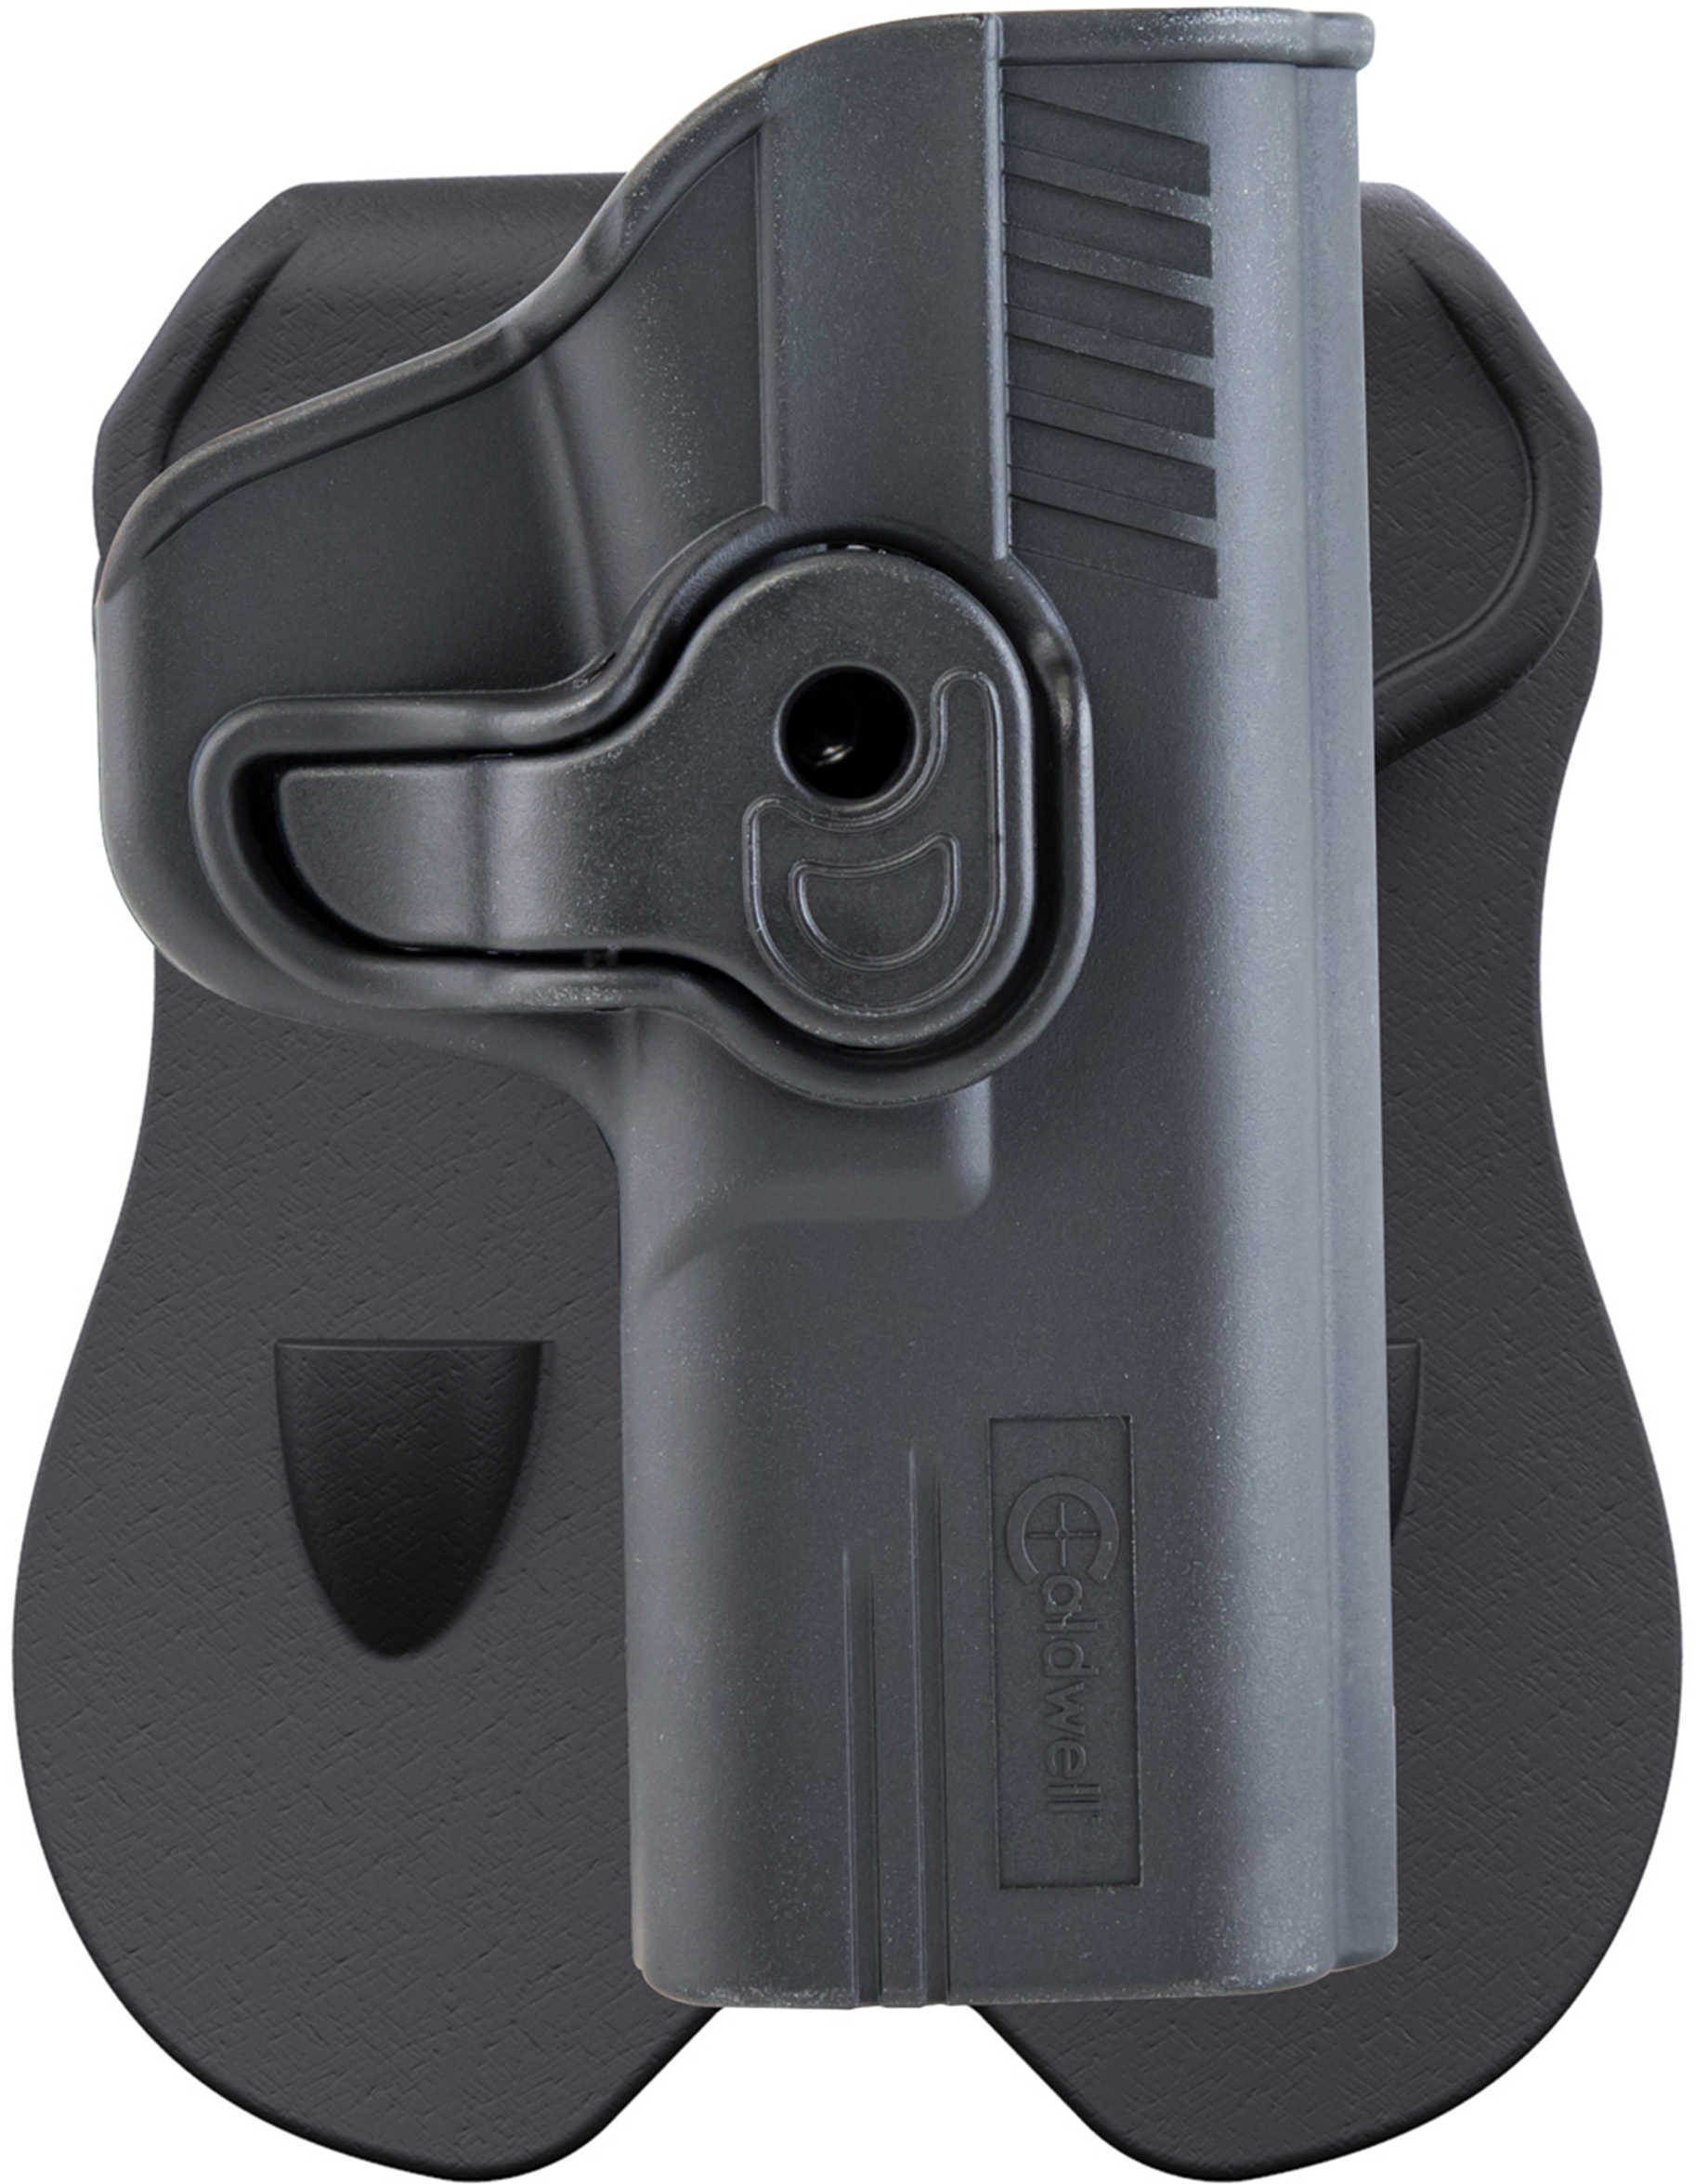 Caldwell Tac Ops Holster Smith & Wesson M&P 9mm, Black Md: 110059